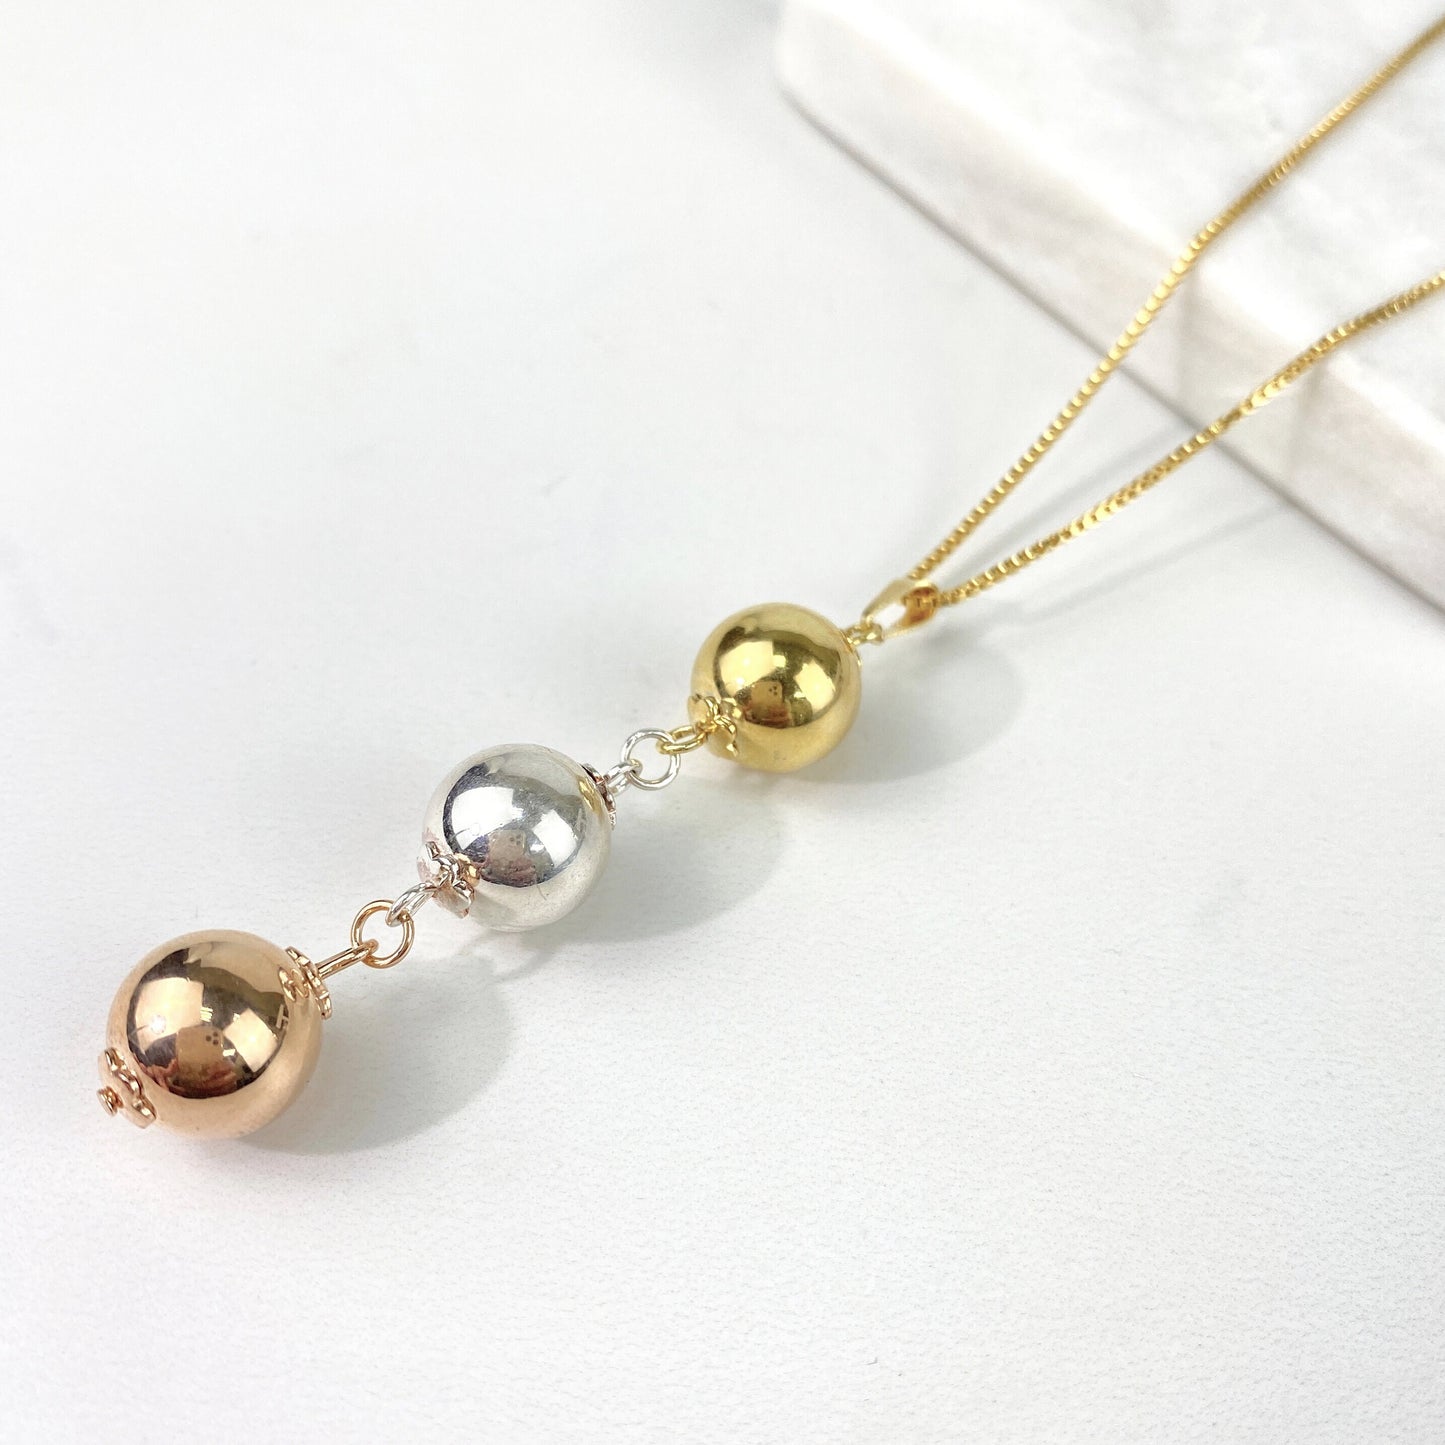 18k Gold Filled 1mm Box Chain with Three Tone Balls Charms Necklace, Gold, Silver & Rose Gold, Wholesale Jewelry Making Supplies